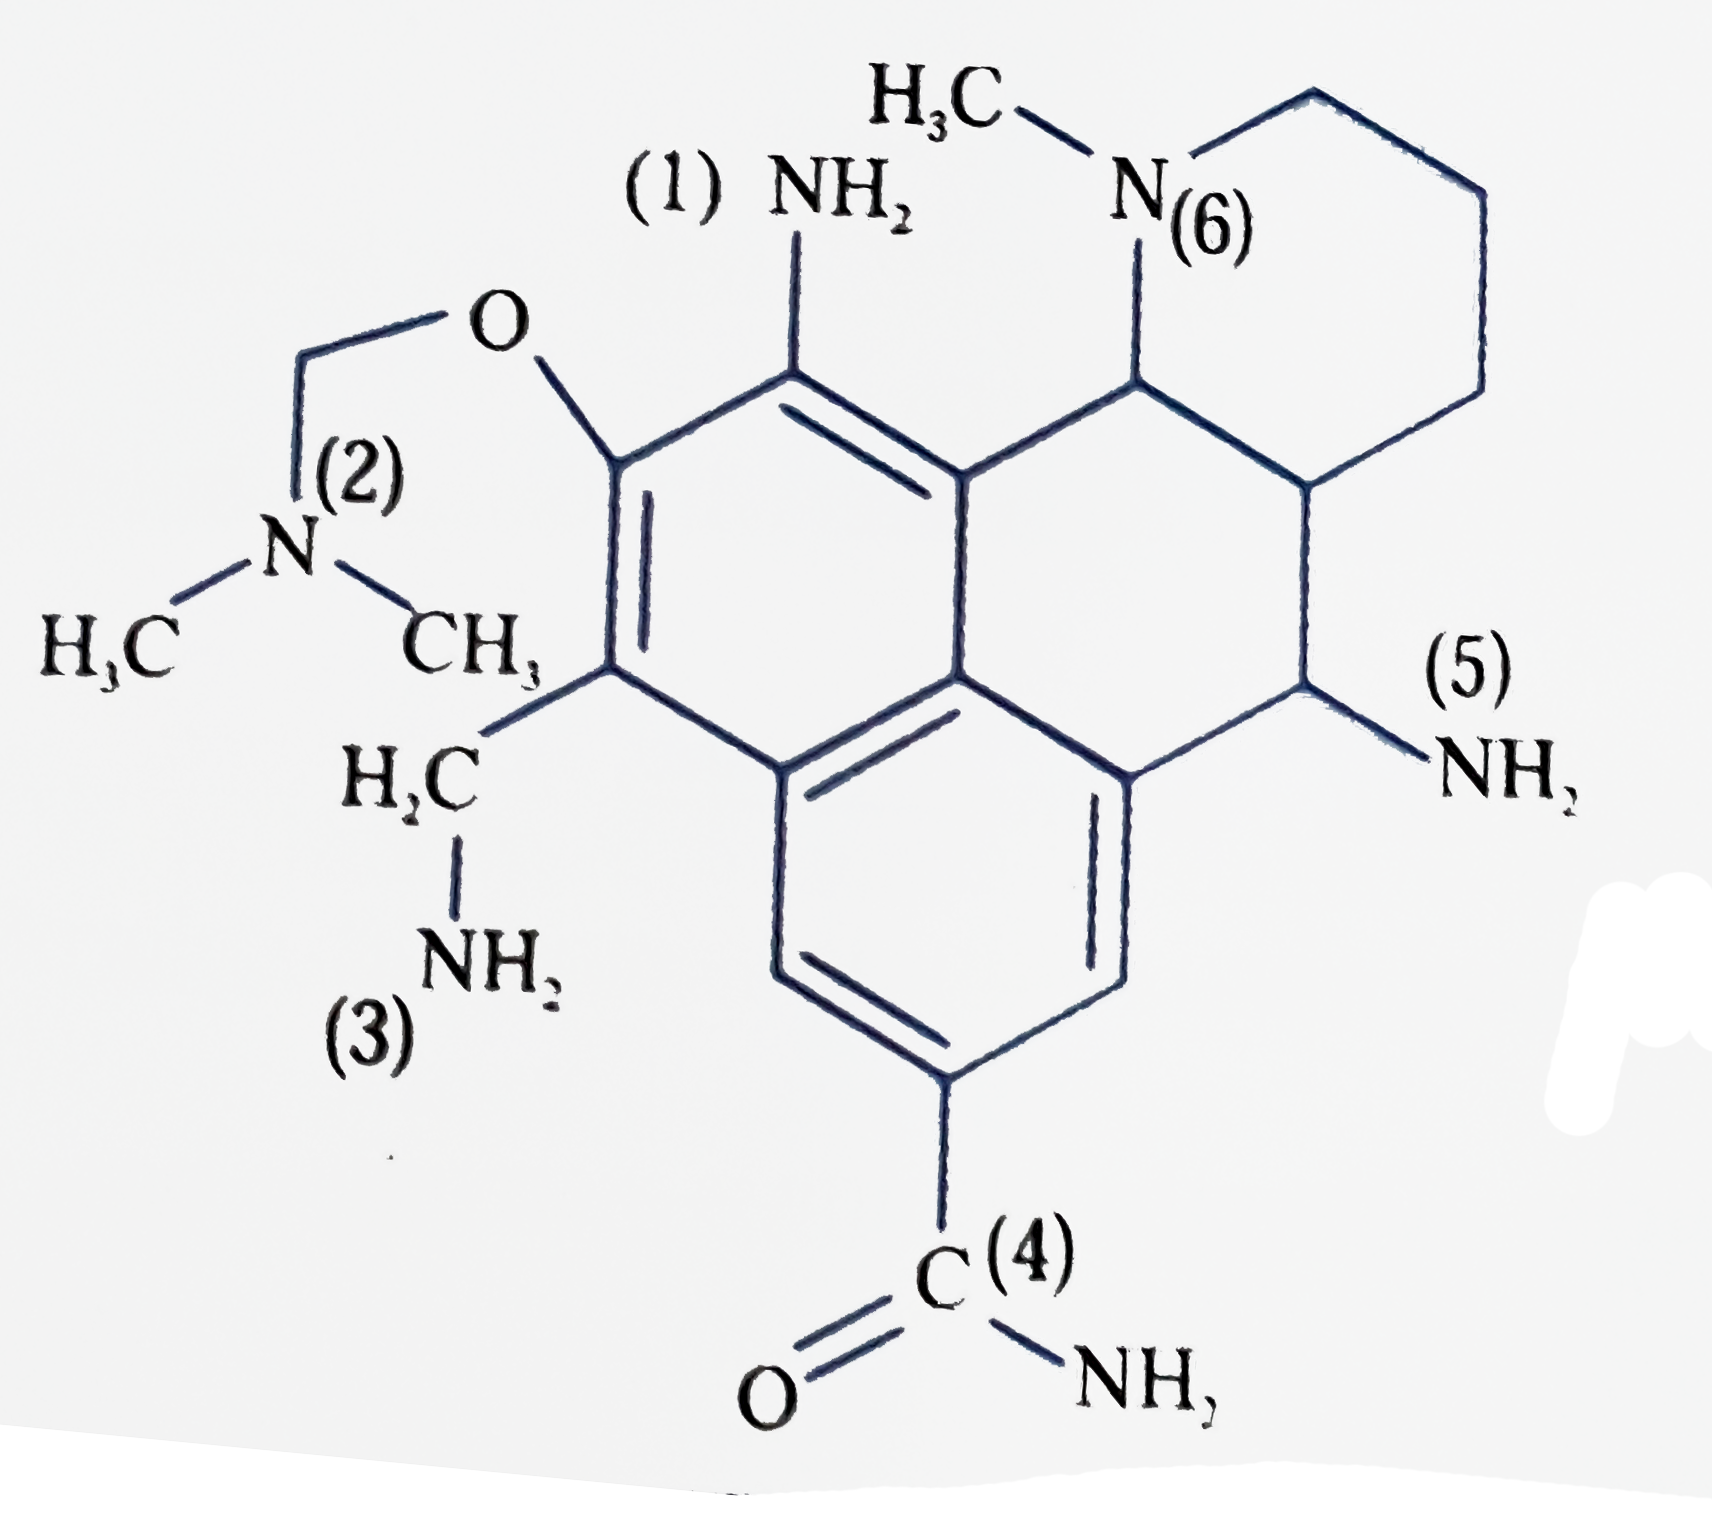 The least basic N in the given molecule is?